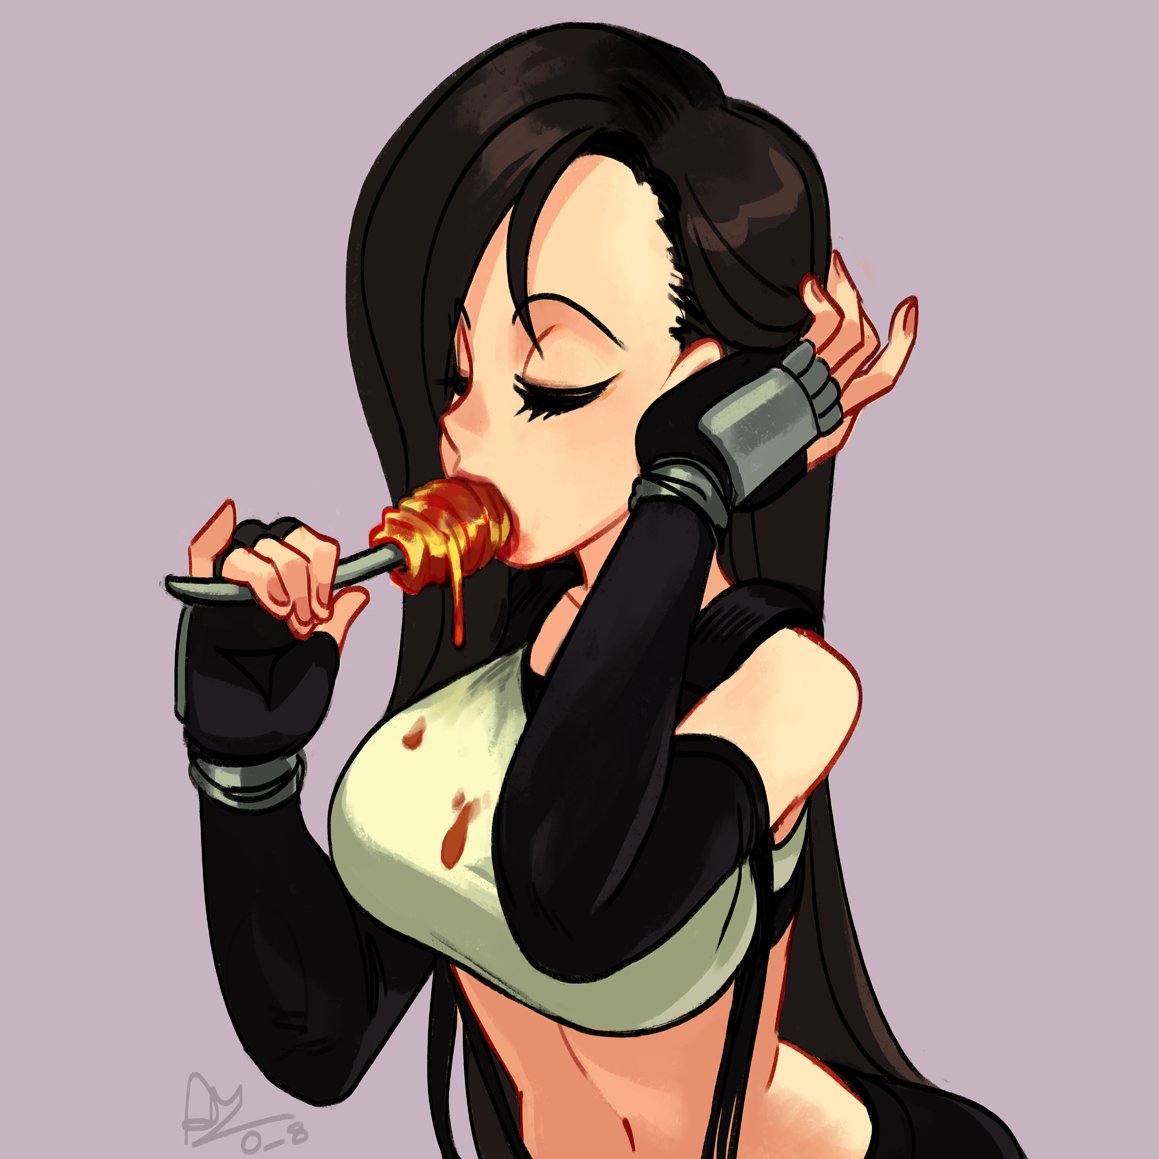 「Was requested to repost this !#Tifa 」|o_8 Alex Ahadのイラスト